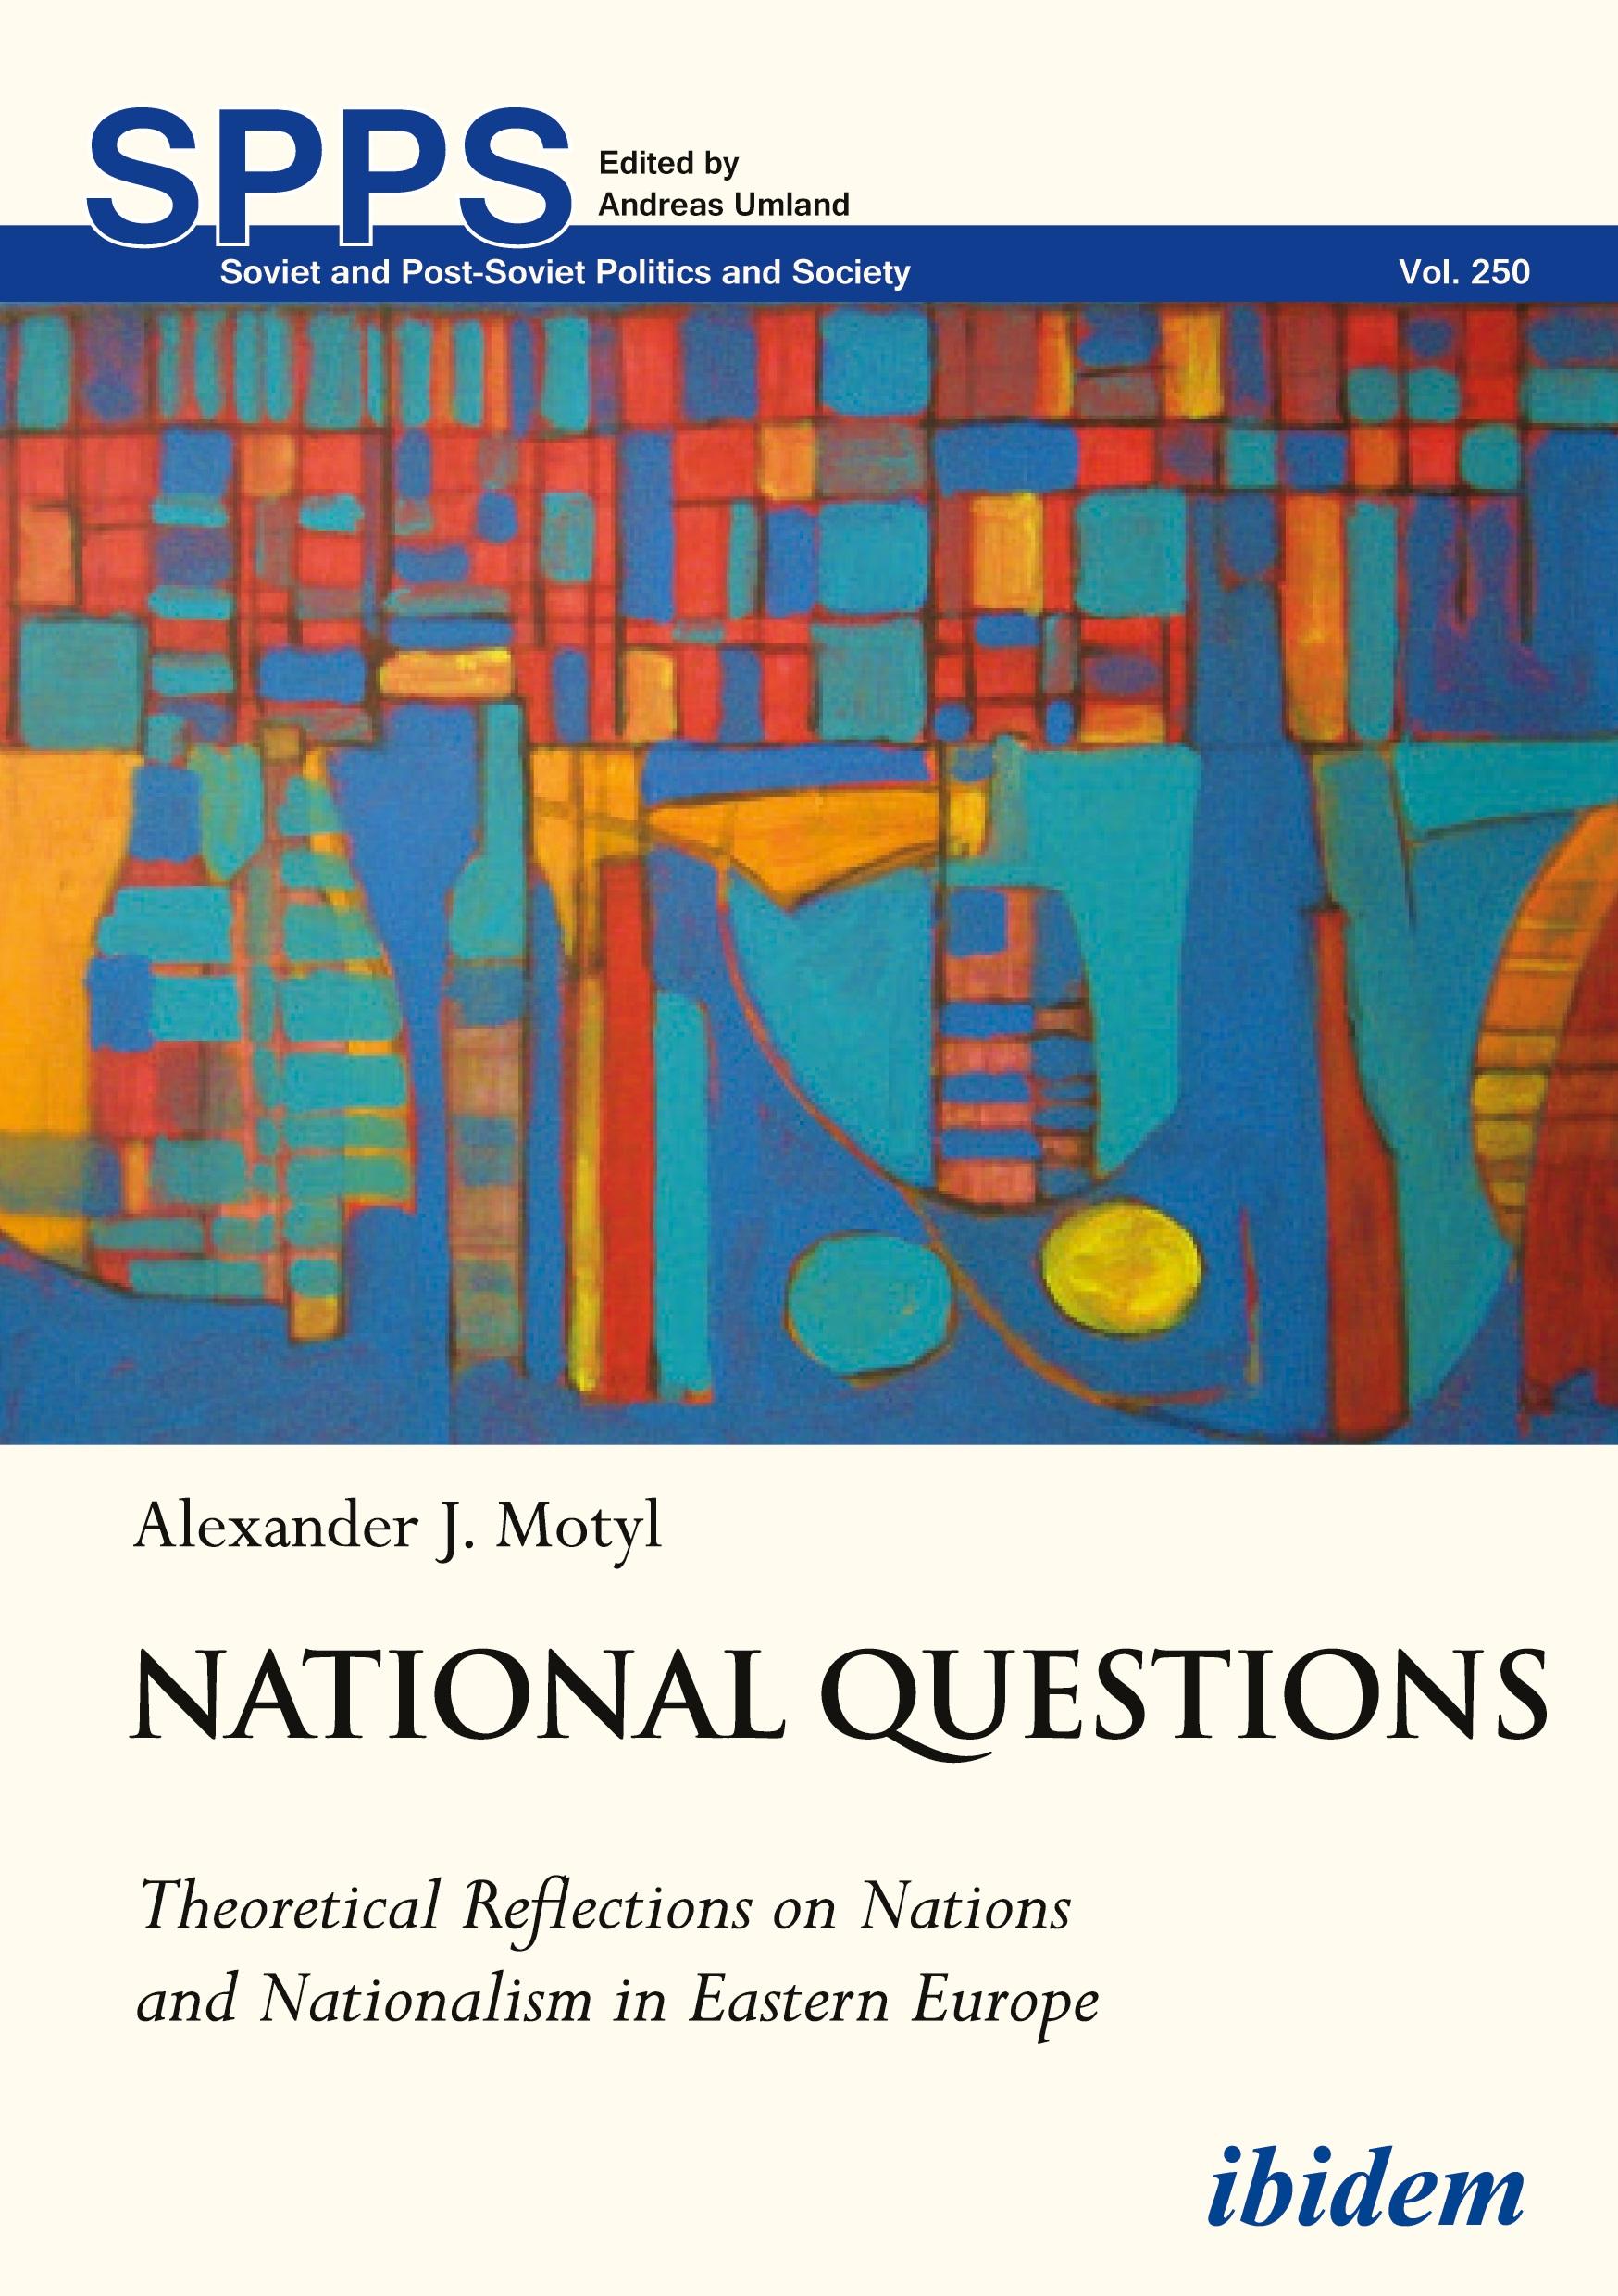 National Questions: Theoretical Reflections on Nations and Nationalism in Eastern Europe (Soviet and Post-Soviet Politics and Society)